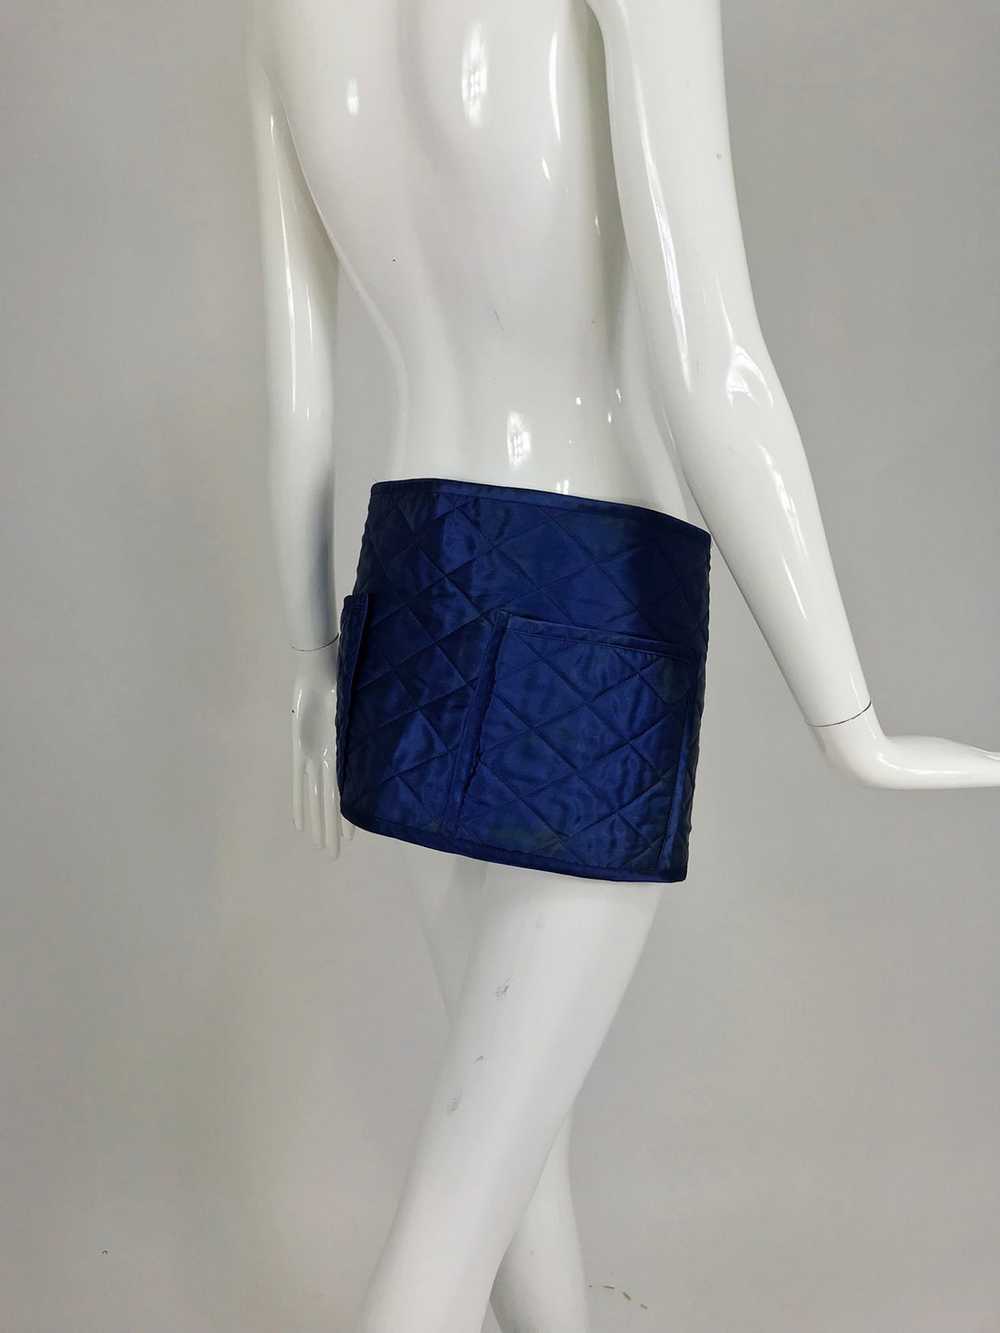 Sonia Rykiel quilted blue satin belt or skirt wit… - image 9